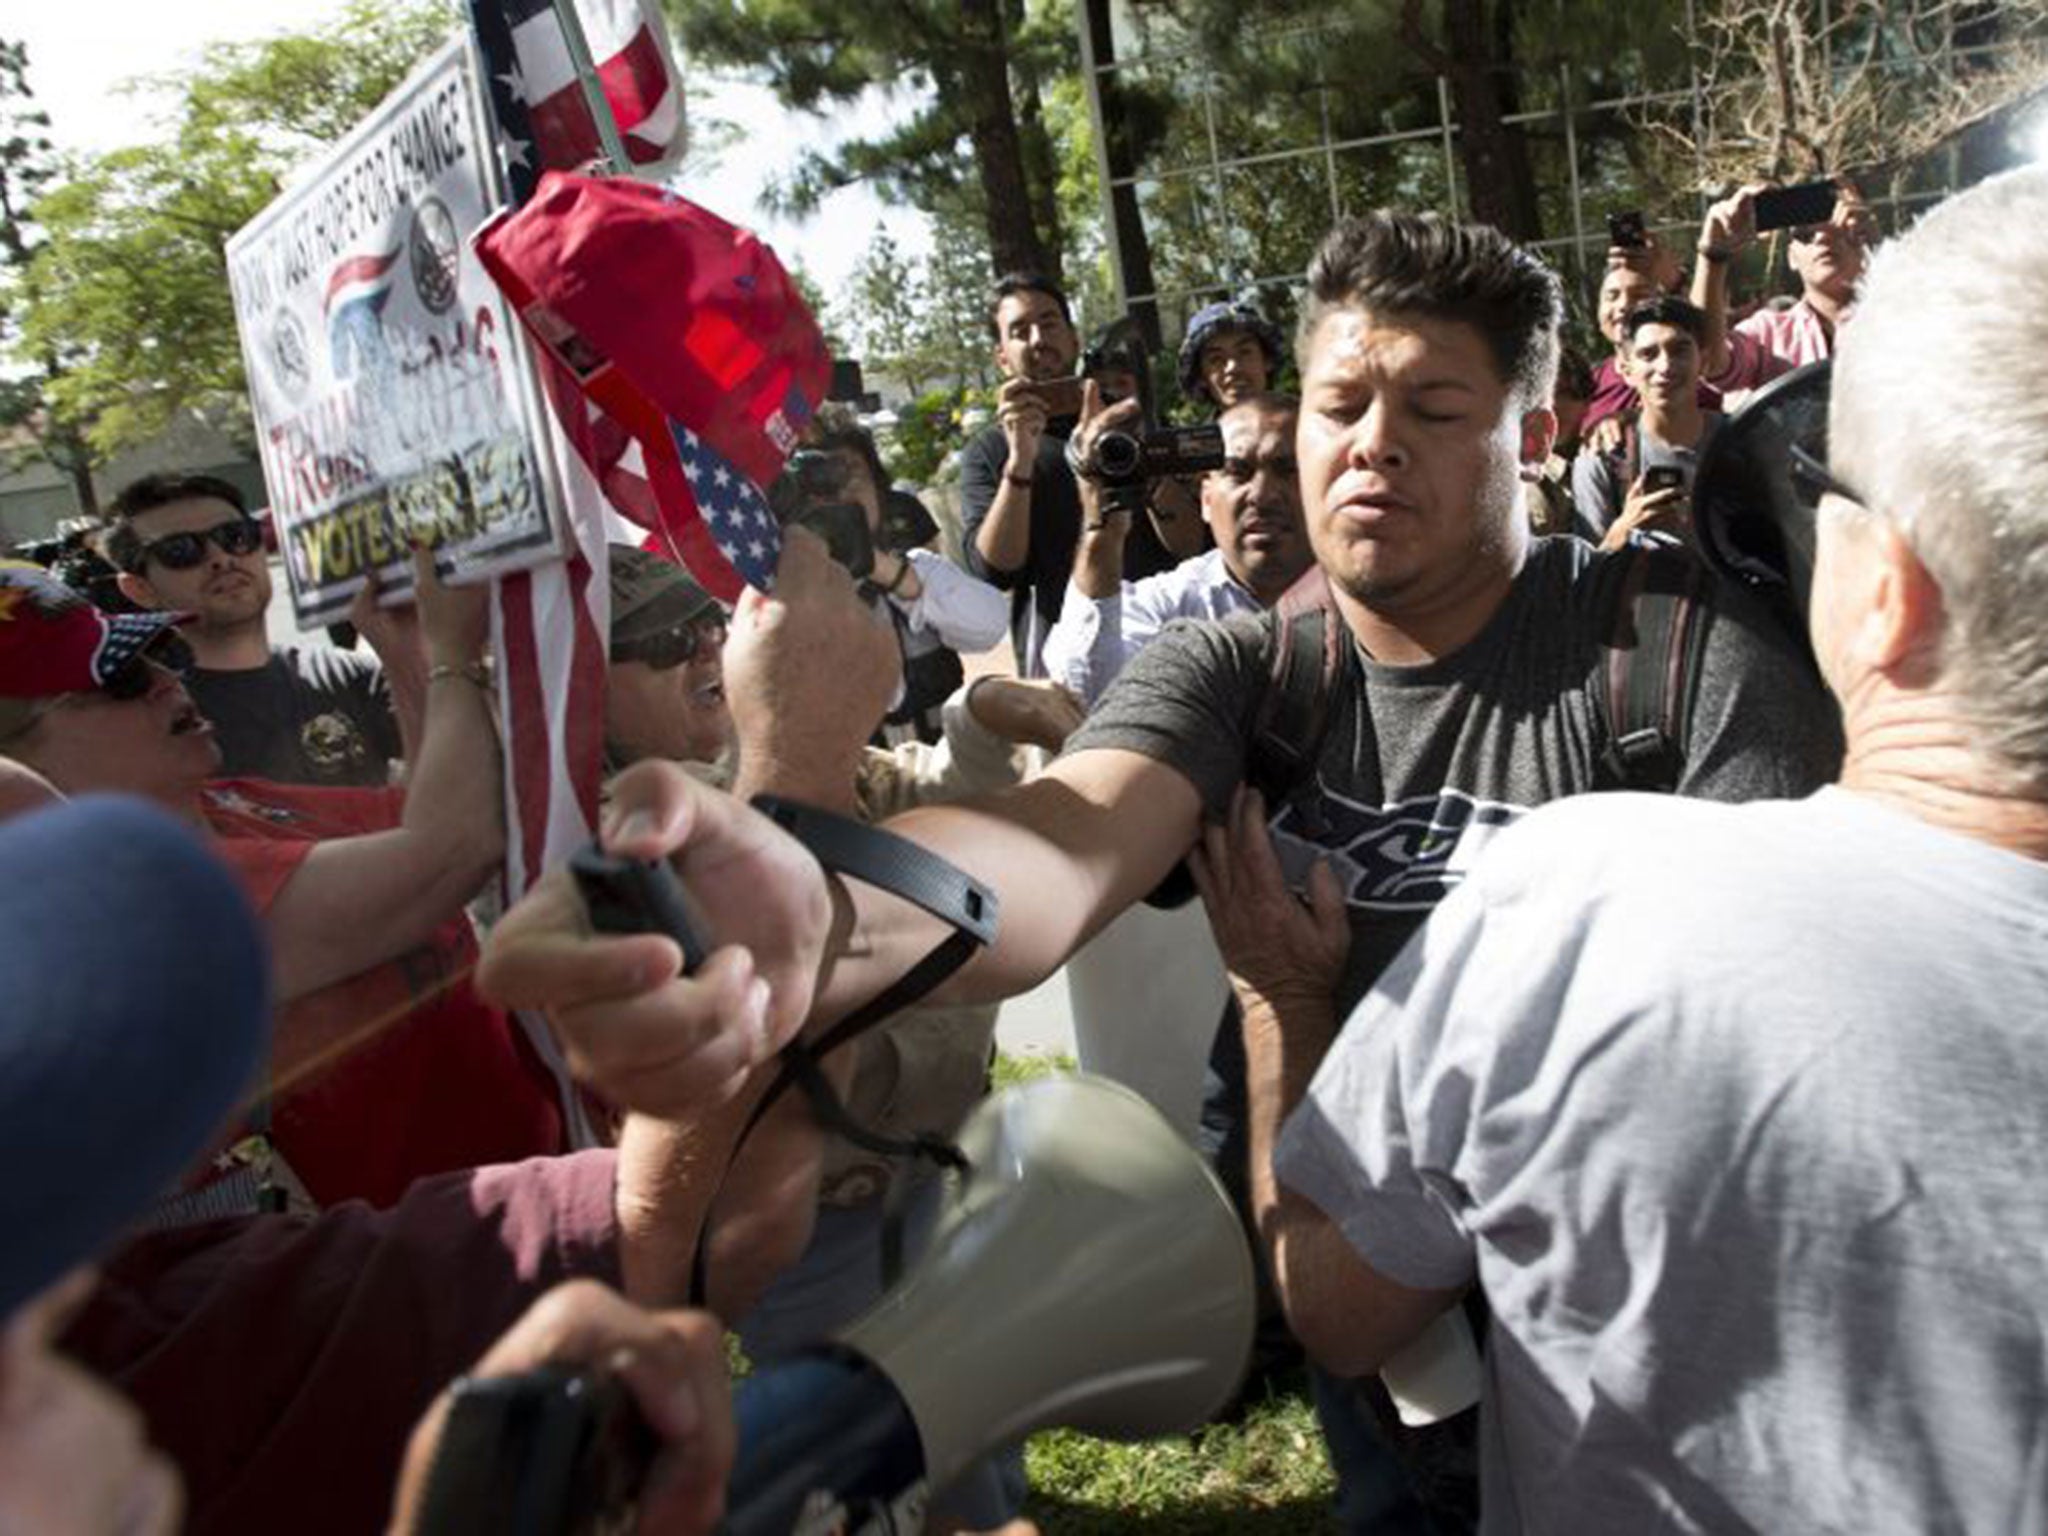 A man, center, sprays Republican presidential candidate Donald Trump supporters with pepper spray during a rally in front of the Anaheim City Hall